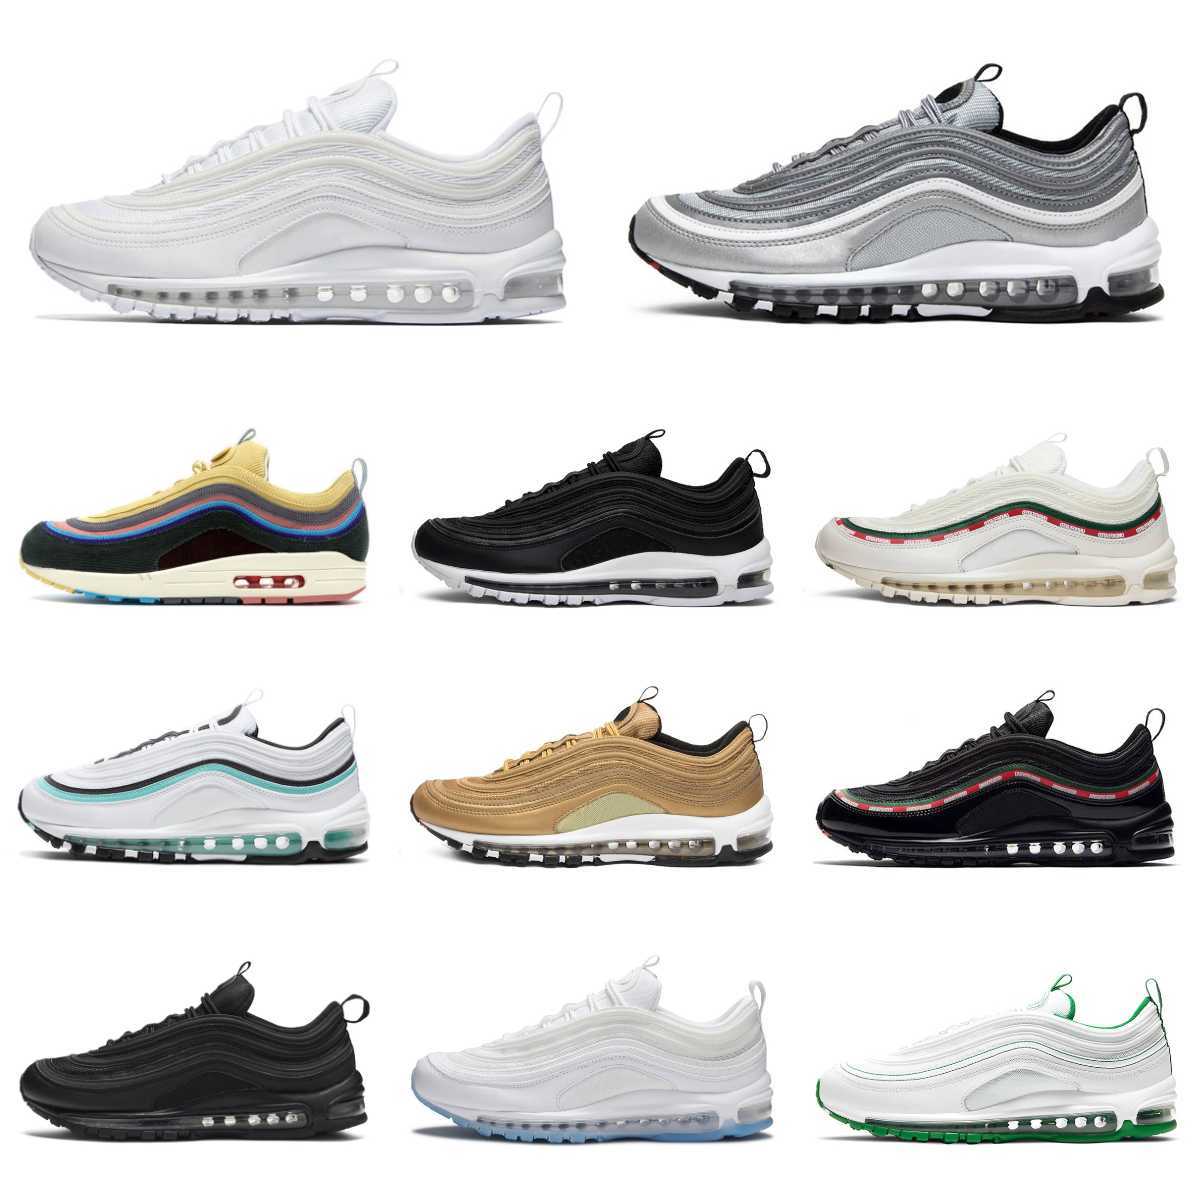 

Trainers Max 97 Mens Casual Shoes MSCHF X INRI Jesus Undefeated Black Summit Triple White Metalic Gold Women Designer Air 97s Sean Wotherspoon Sliver Bullet Sneakers, #3 sean wseparatespoon